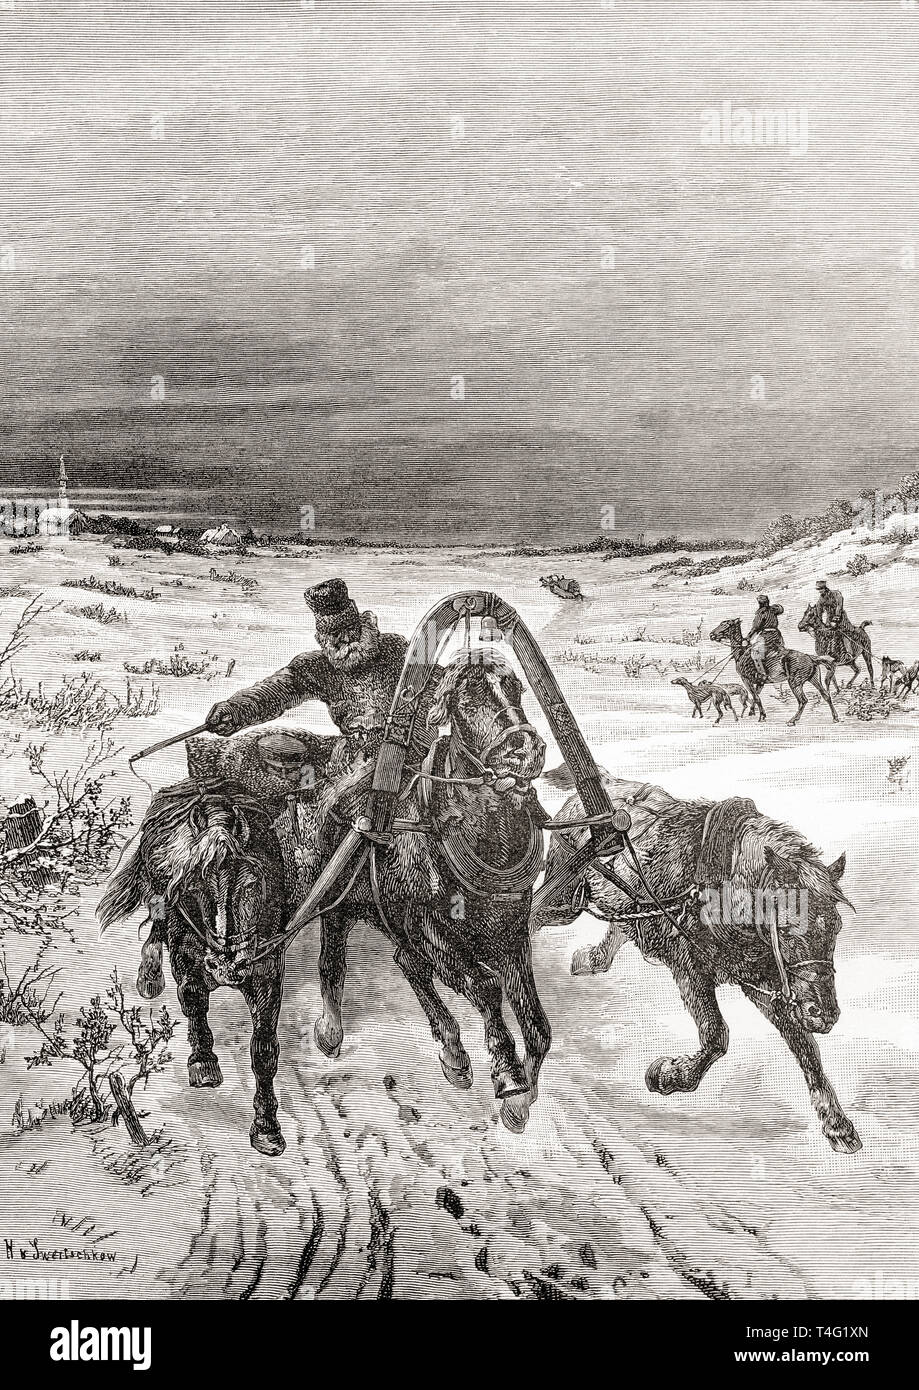 Russian sledging and coursing in the 19th century.  Coursing was the pursuit of game using mainly dogs.  From London Pictures, published 1890 Stock Photo